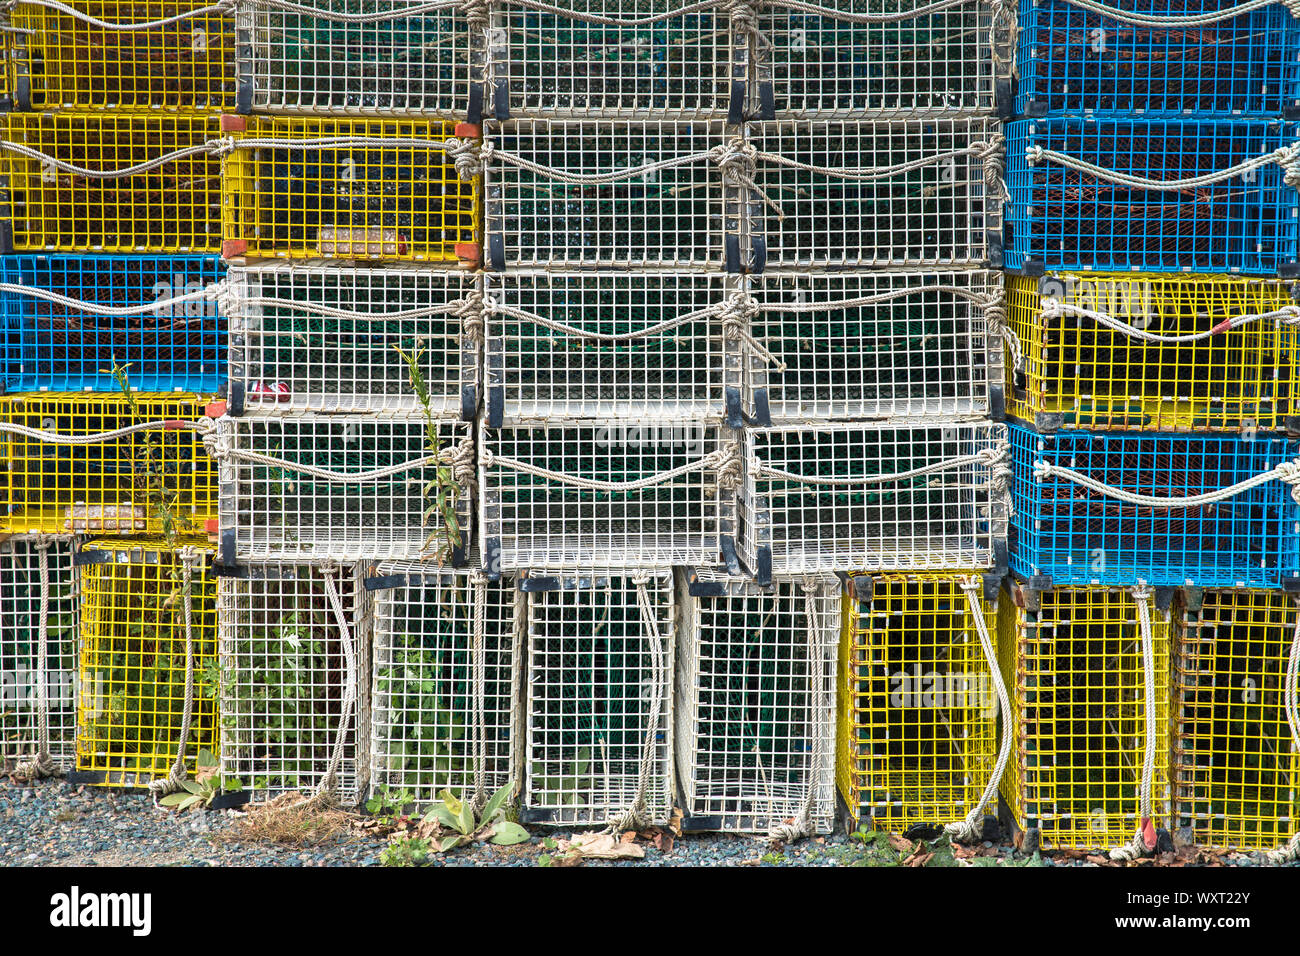 Brightly coloured lobster baskets cages in stacks at Gloucester Harbor, Massachusetts, USA Stock Photo